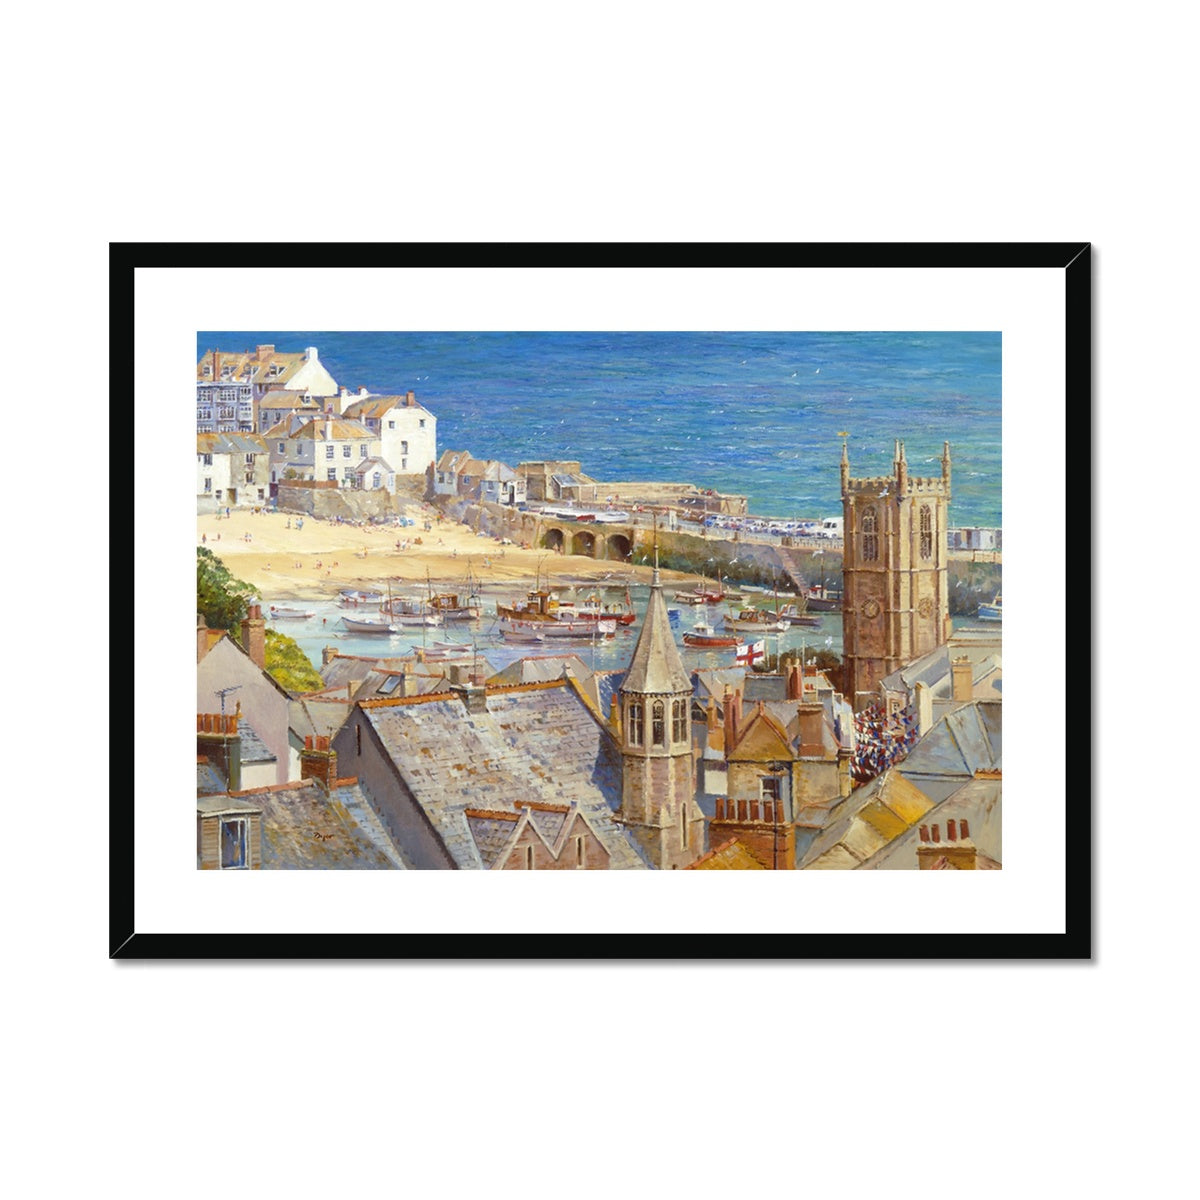 Ted Dyer Framed Open Edition Cornish Fine Art Print. 'The Royal Visit, St Ives'. Cornwall Art Gallery